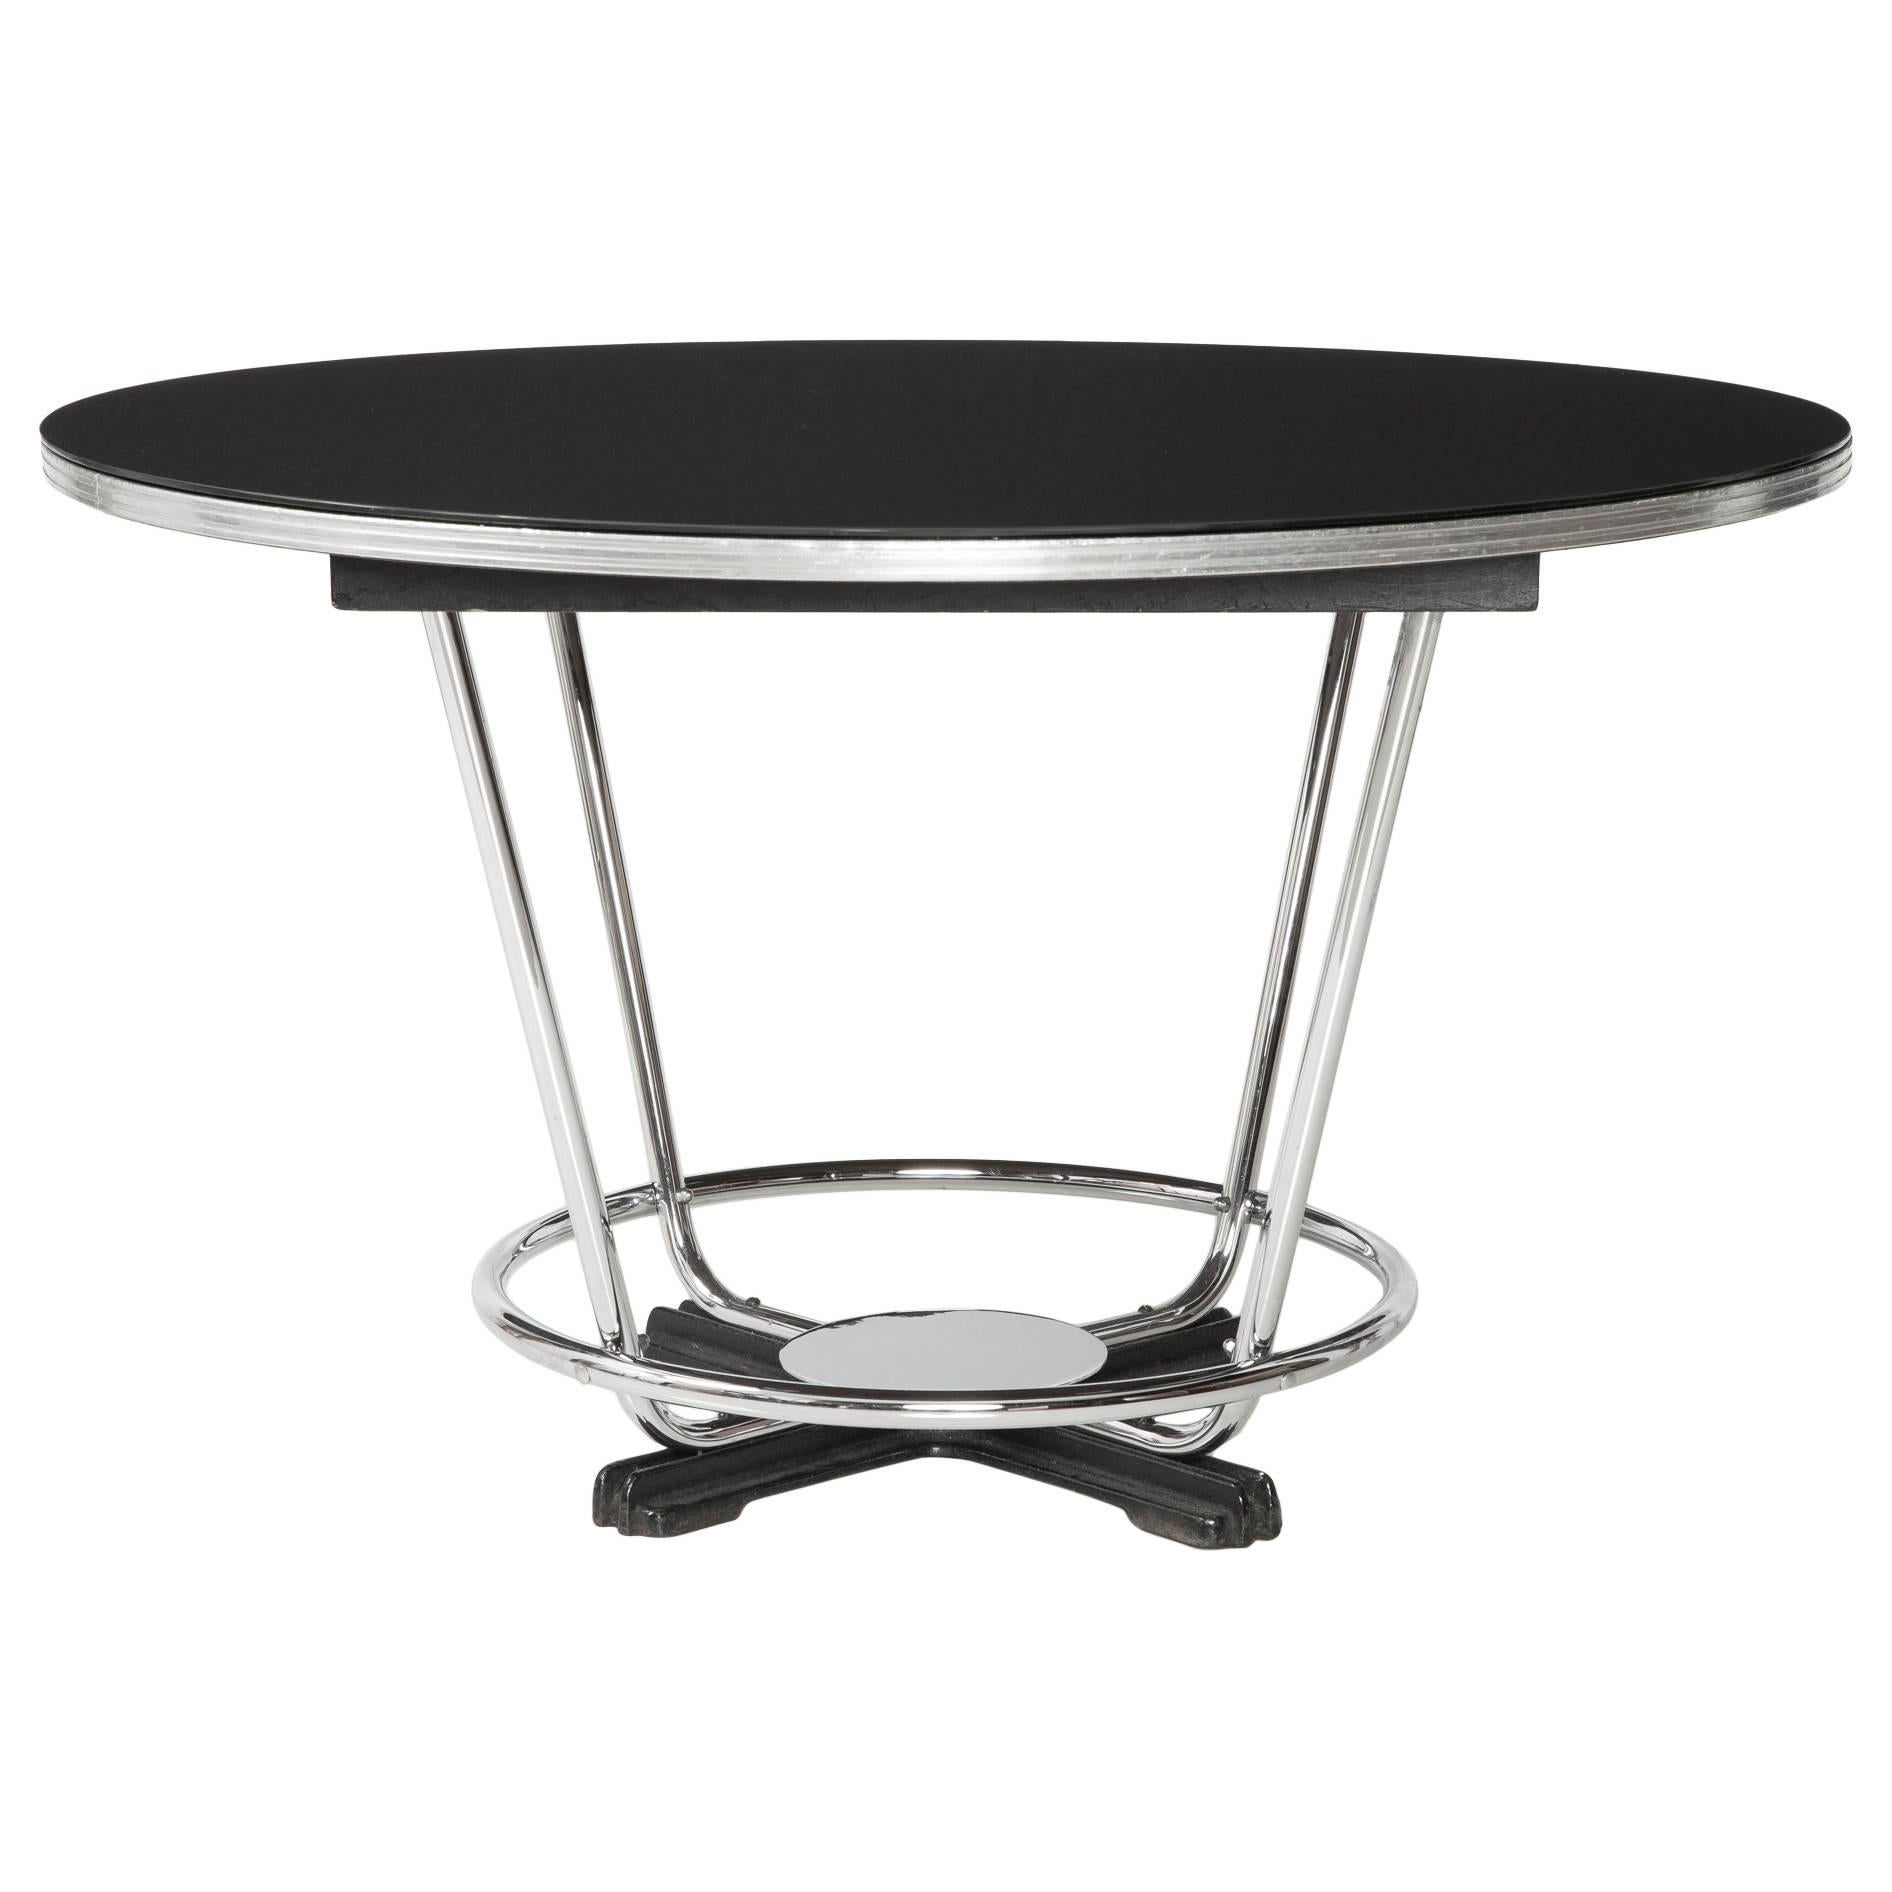 Beautiful Art Deco table, Donald Deskey attribution. Beautiful black glass top with a chrome frame and base - such an amazing and unique design to add to any retro breakfast nook.